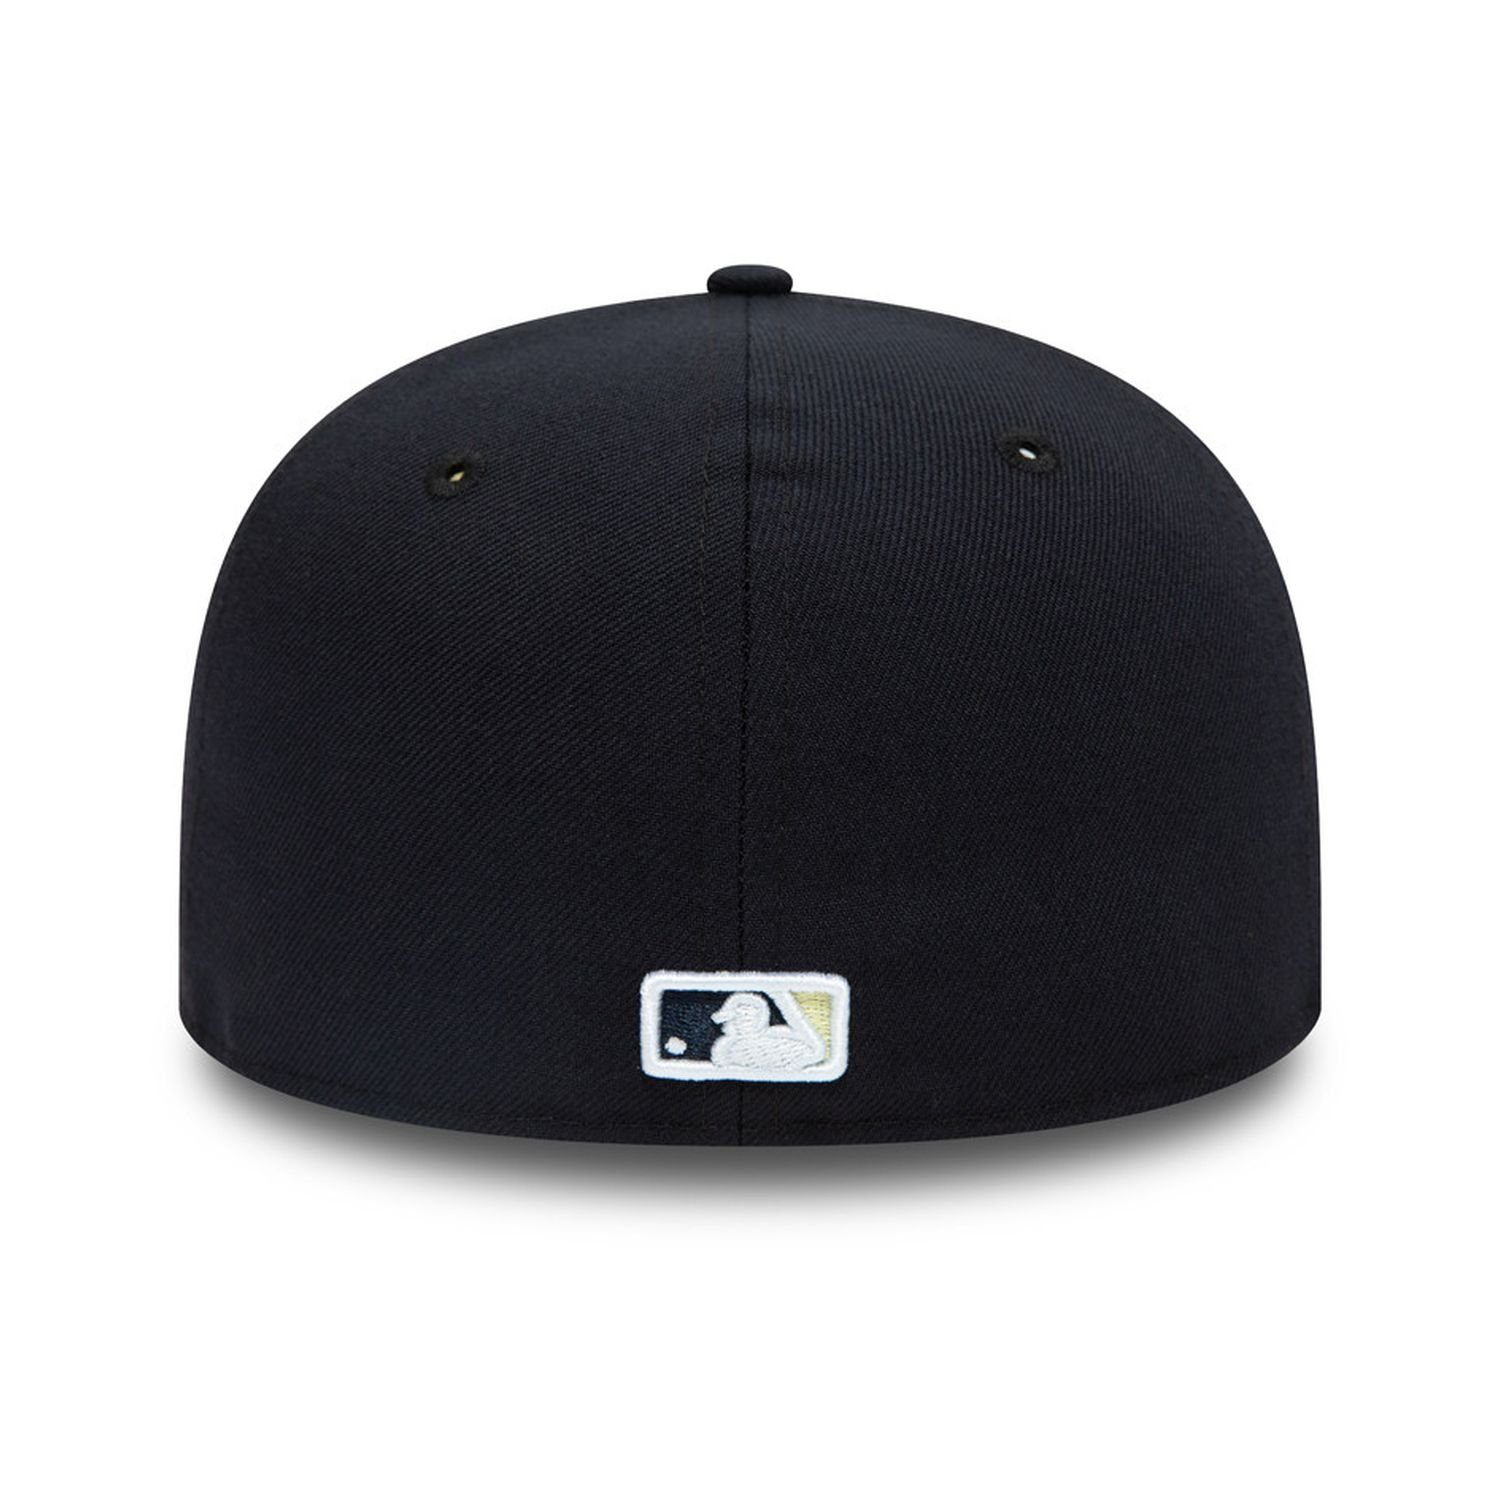 New New York Yankees 59Fifty Cap Fitted Era